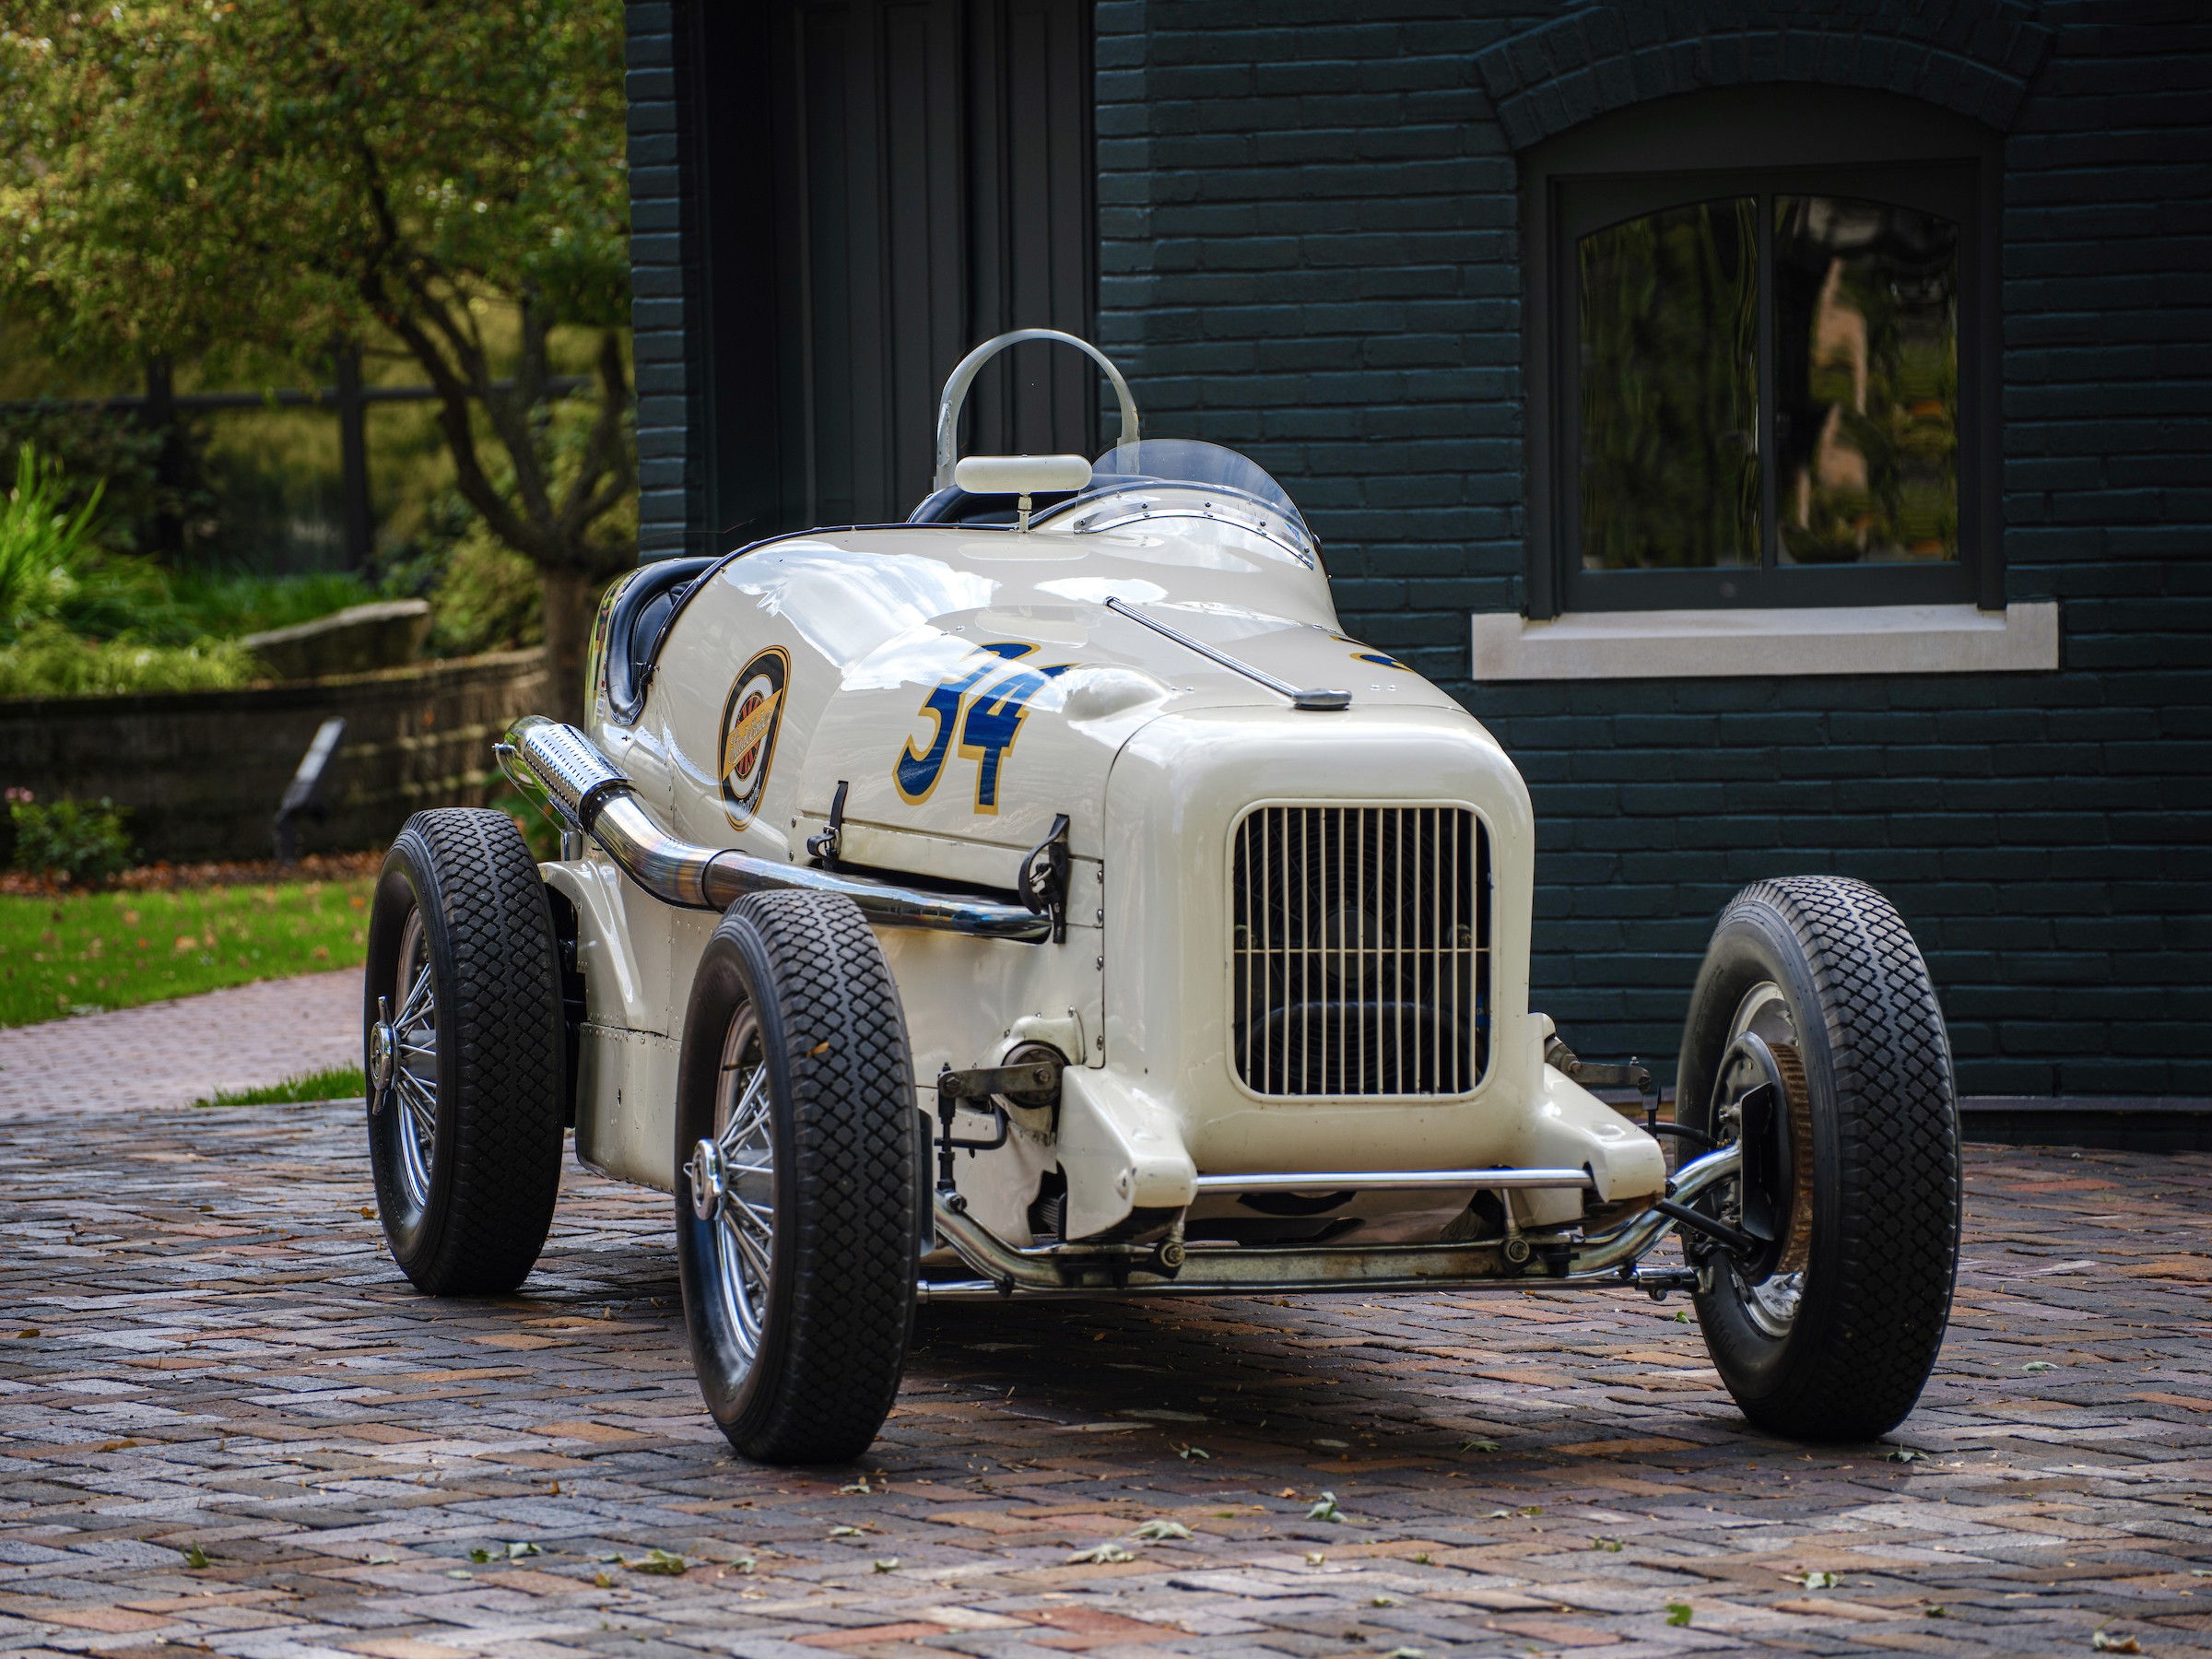 Studebaker National Museum Acquires Rare Studebaker Indianapolis 500 Race Car